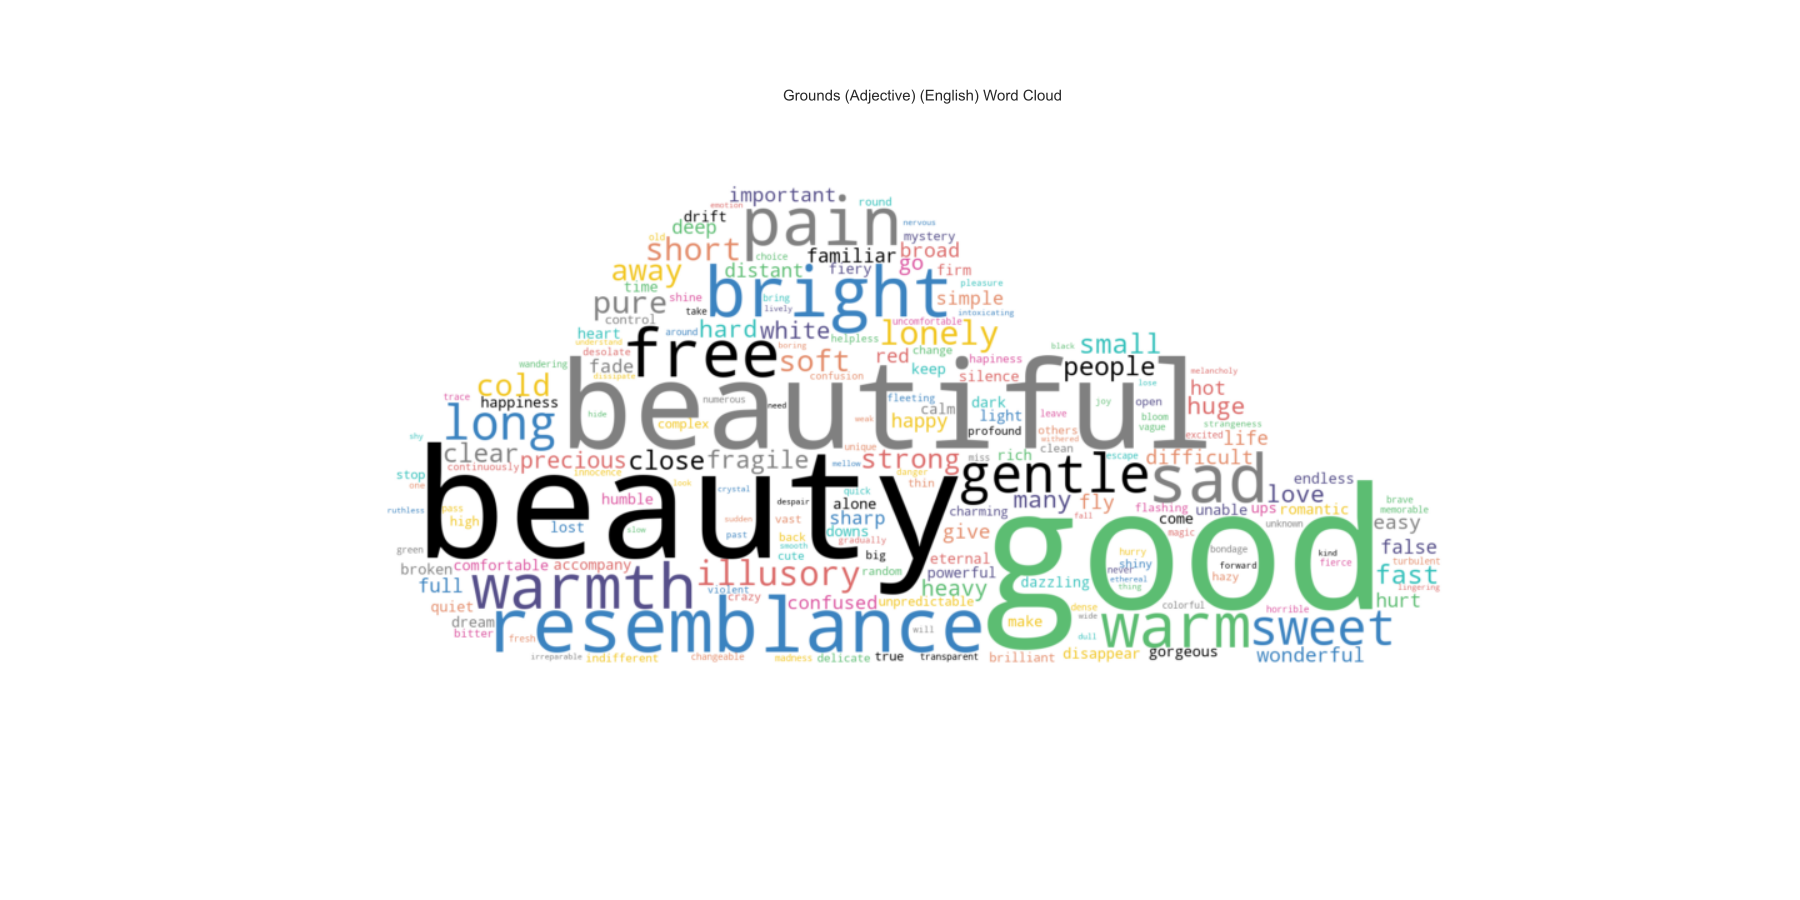 Grounds (Adjective) (English) Word Cloud_word_cloud.png